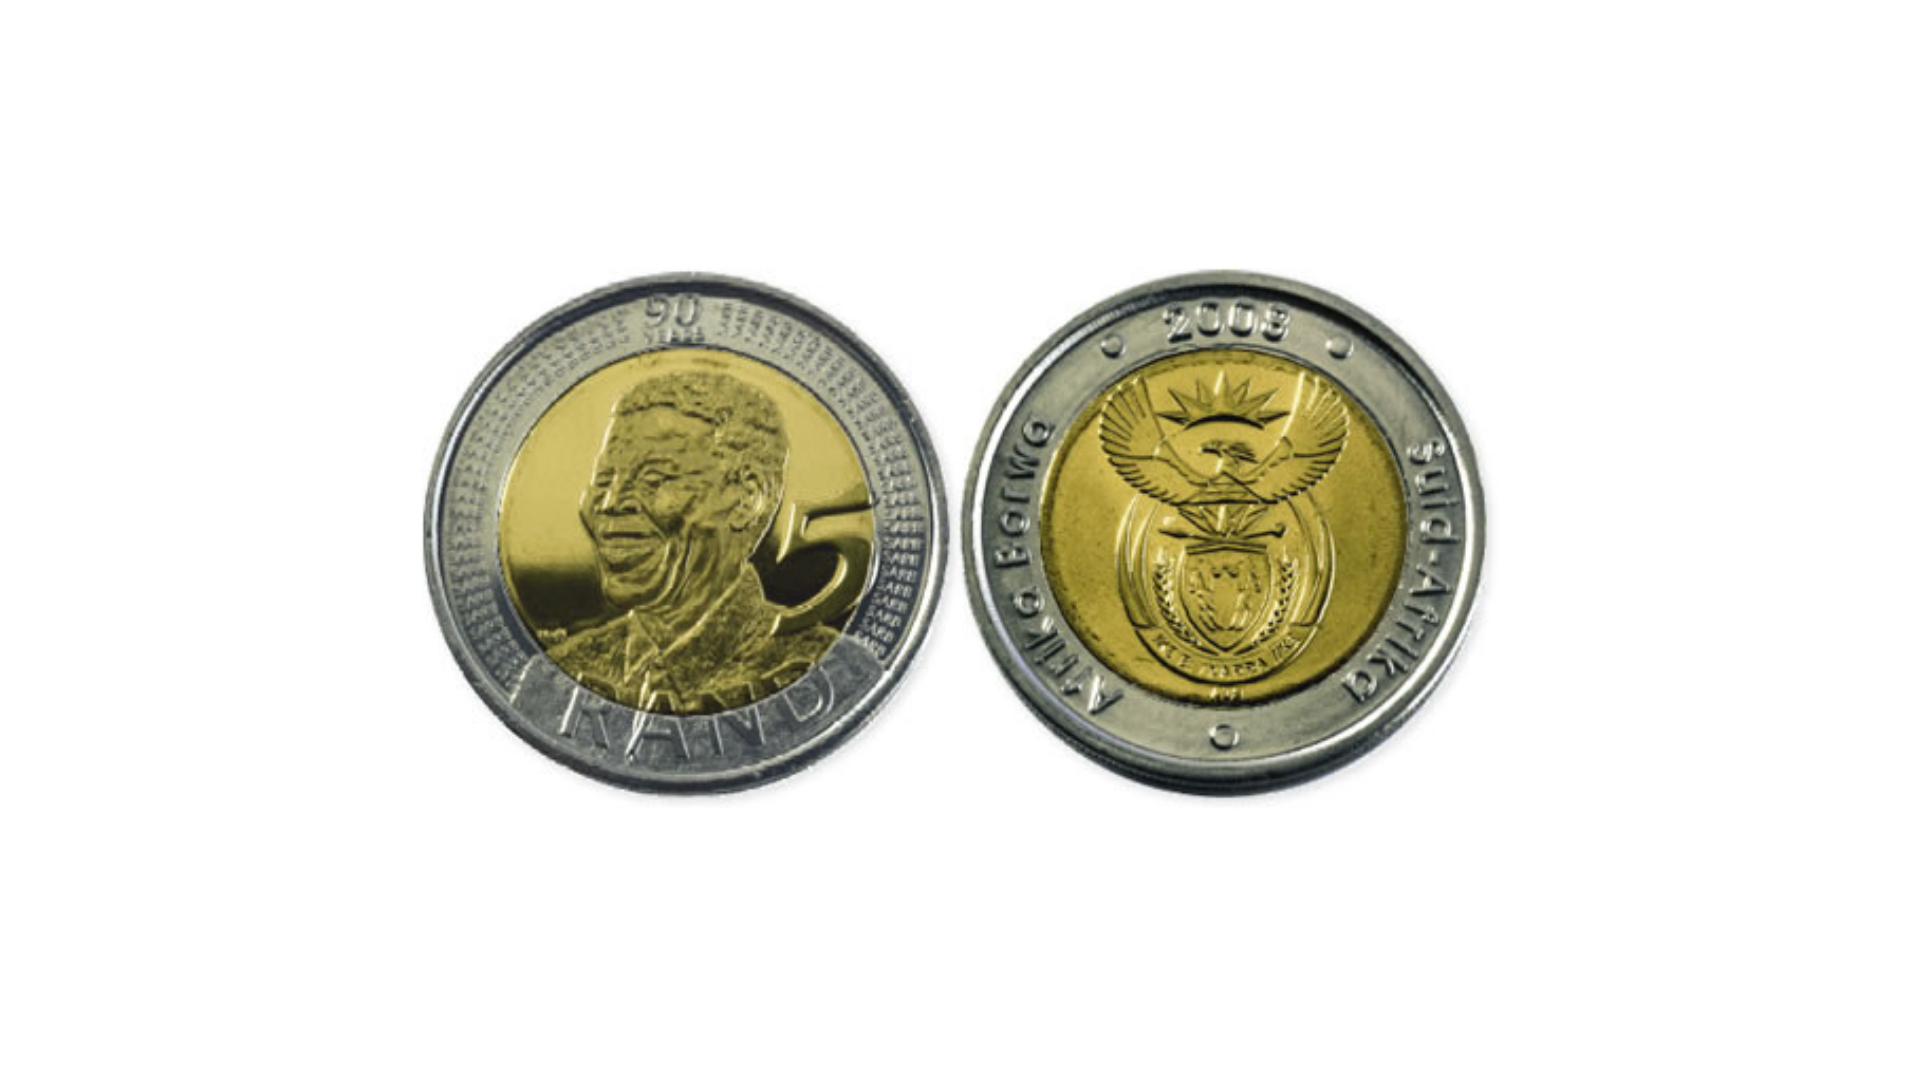 Where to Sell your Mandela Coins